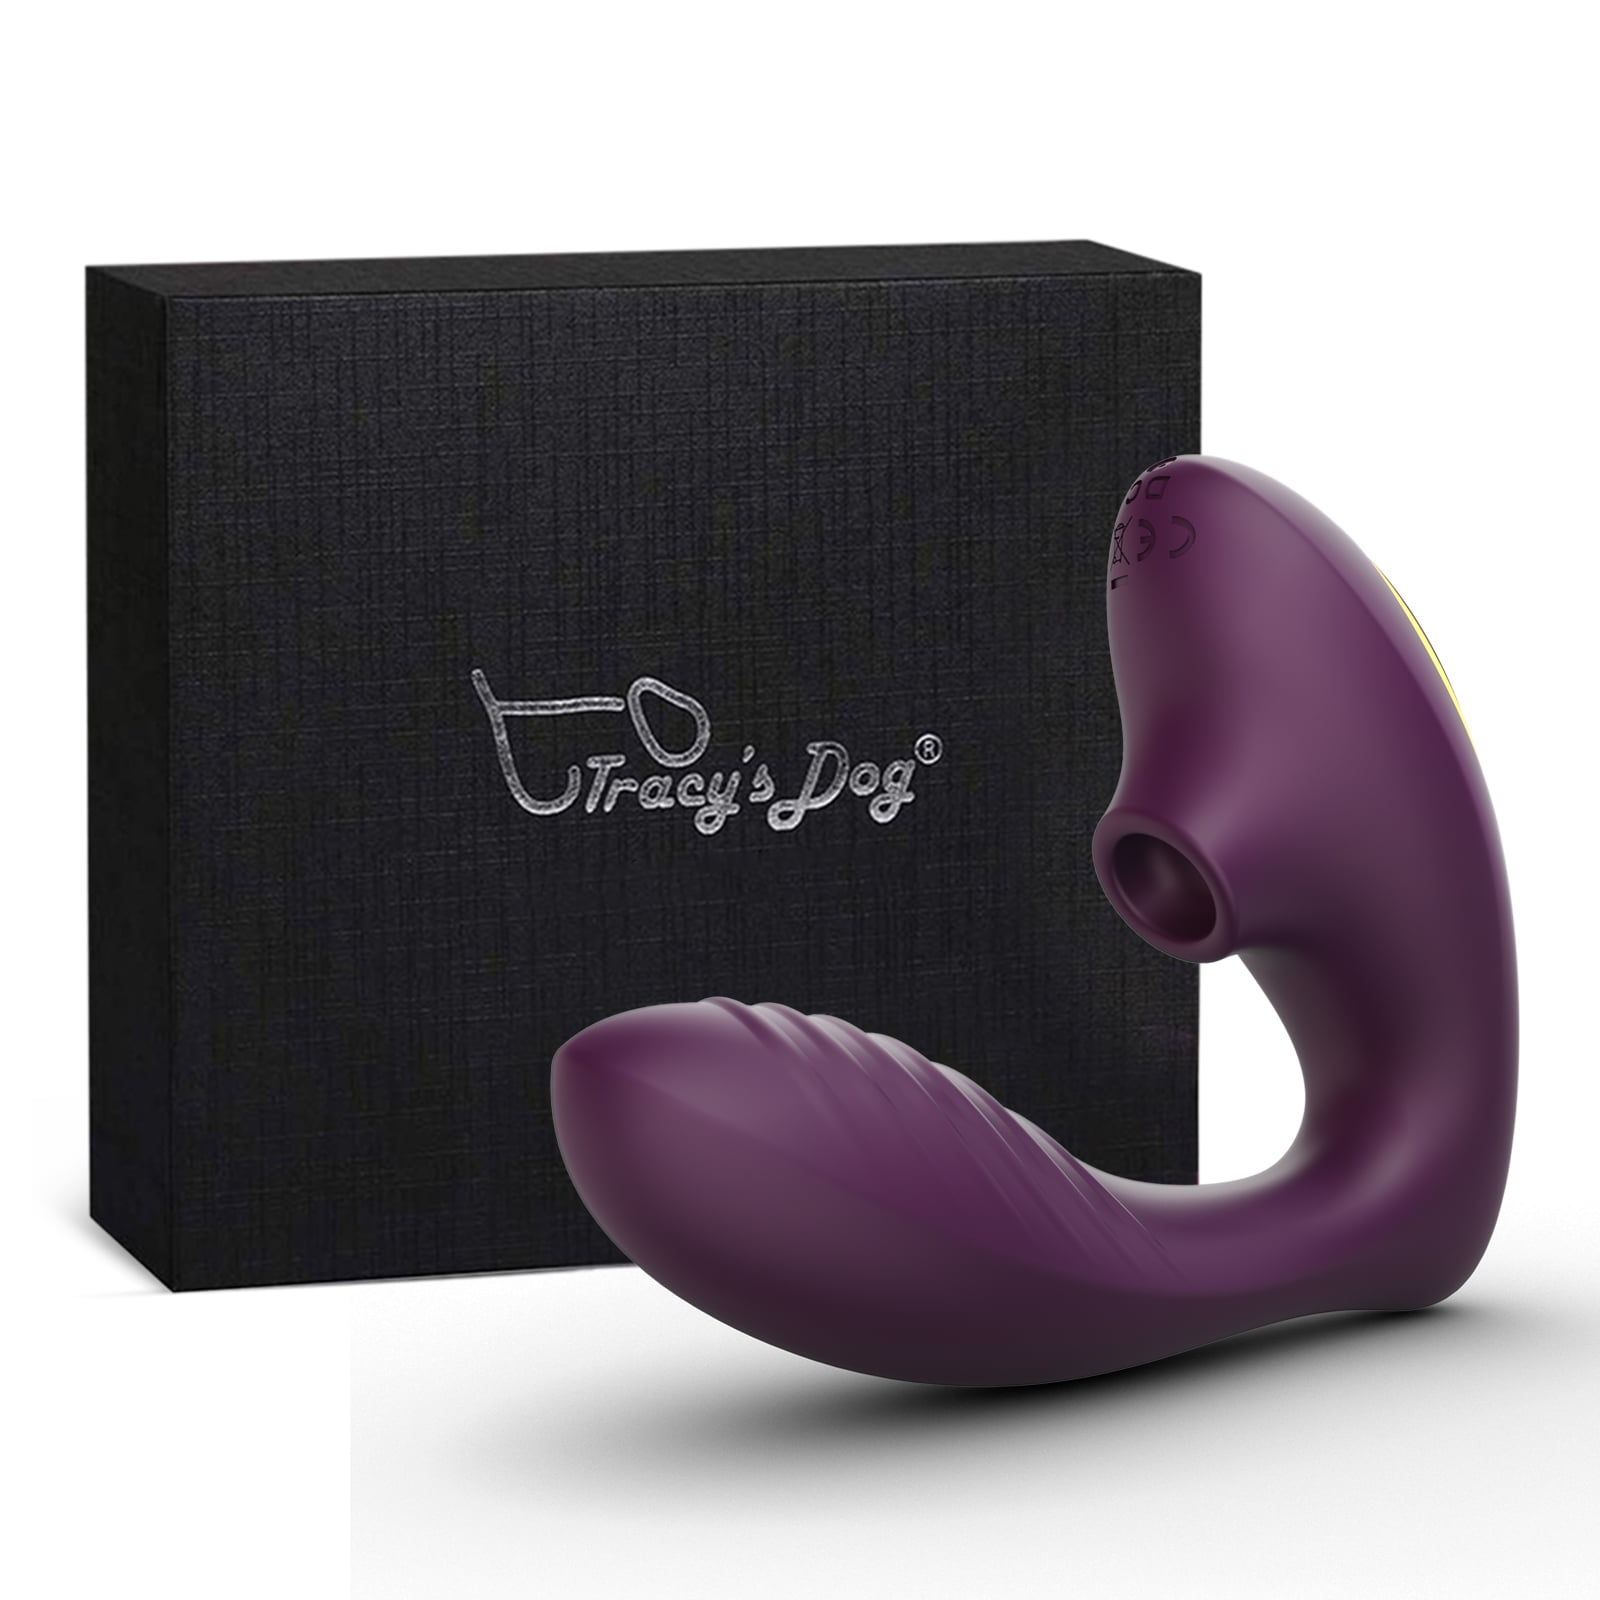 Tracys Dog OG Clitoral Sucking Vibrator for G Spot Clit Stimulator with 10 Suction and Vibration Patterns, Adult Sex Toys for Women, Purple picture